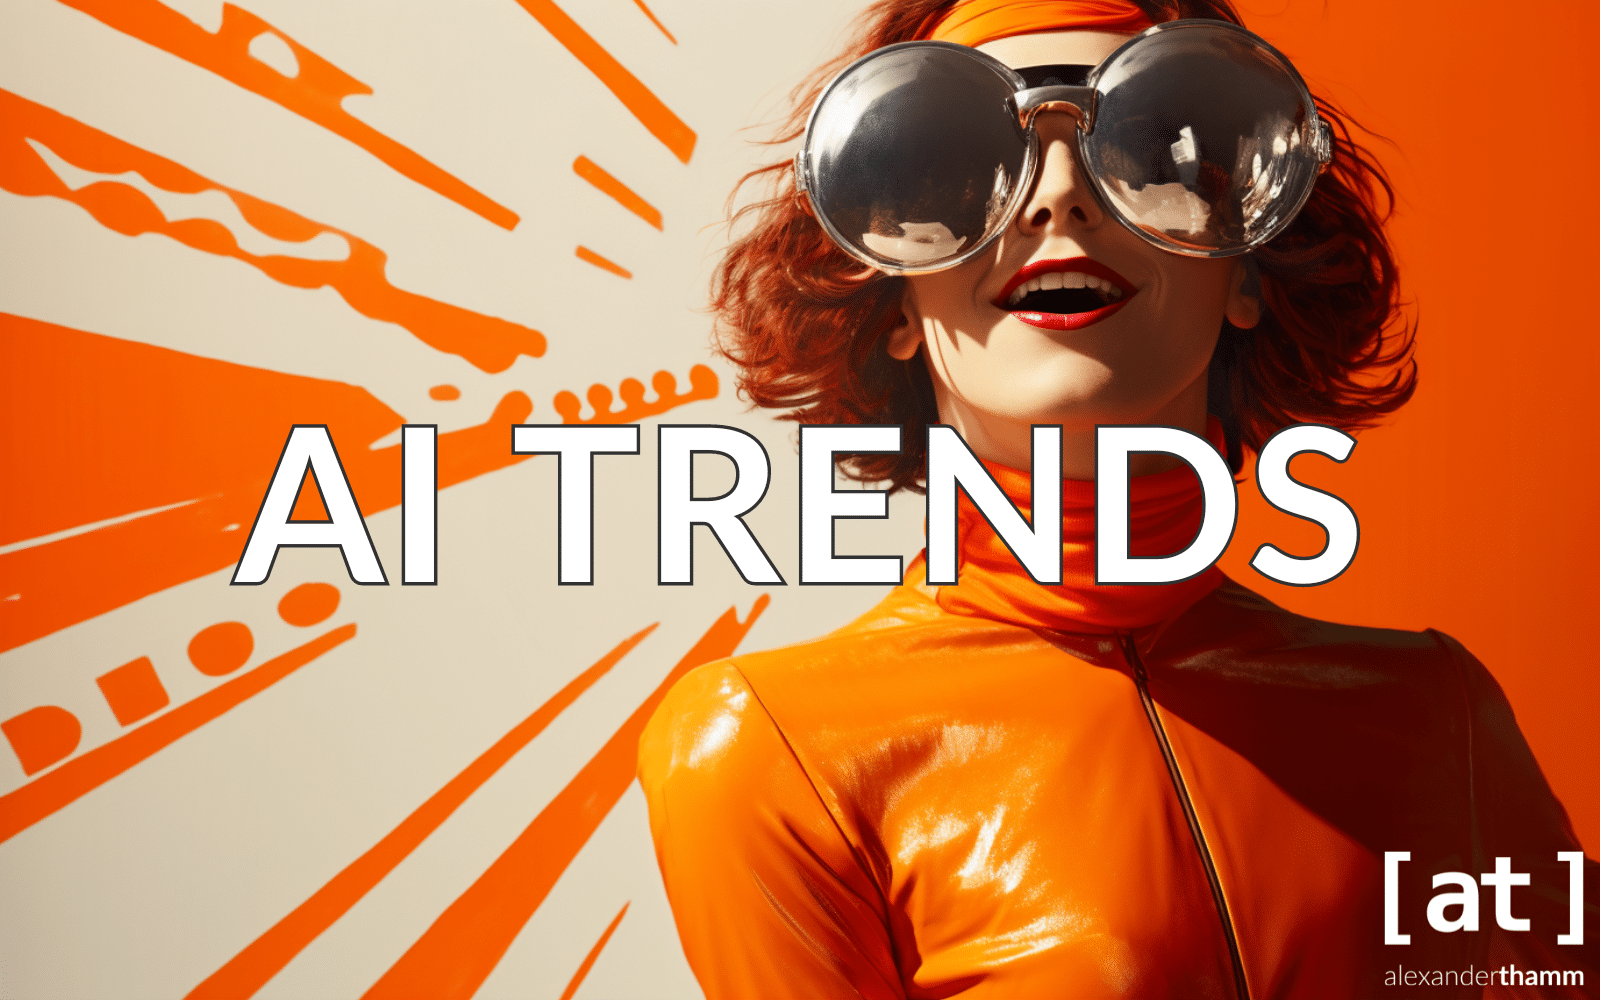 KI Trends, fashion photography with a woman wearing round sunglasses and an orange suit